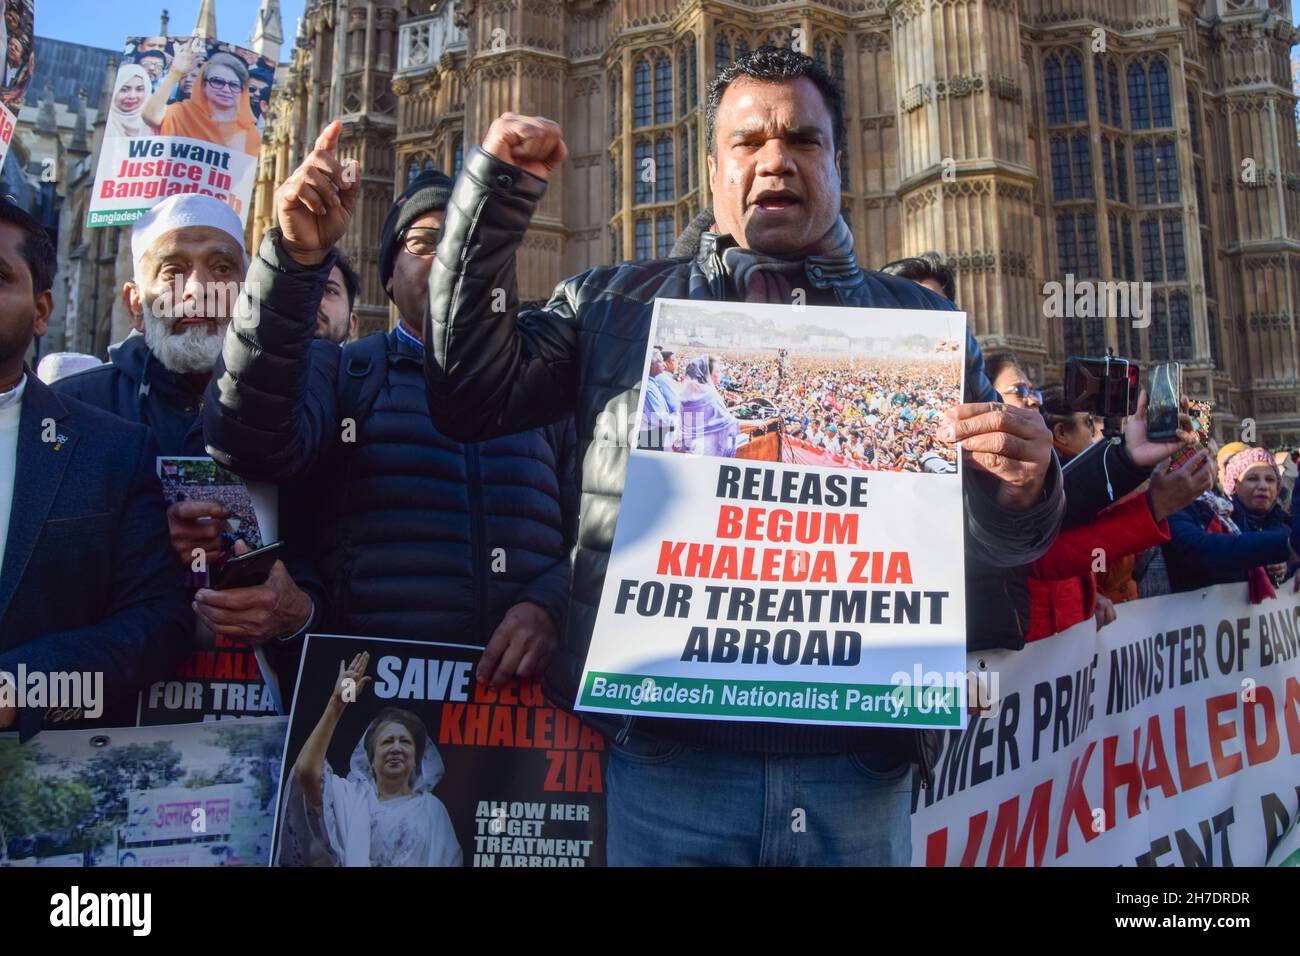 London, UK. 22nd November 2021. Protesters gathered outside the parliament in support of former Bangladesh Prime Minister and Bangladesh Nationalist Party leader Khaleda Zia, who has been suffering health problems, demanding that she be released for treatment abroad. Credit: Vuk Valcic / Alamy Live News Stock Photo